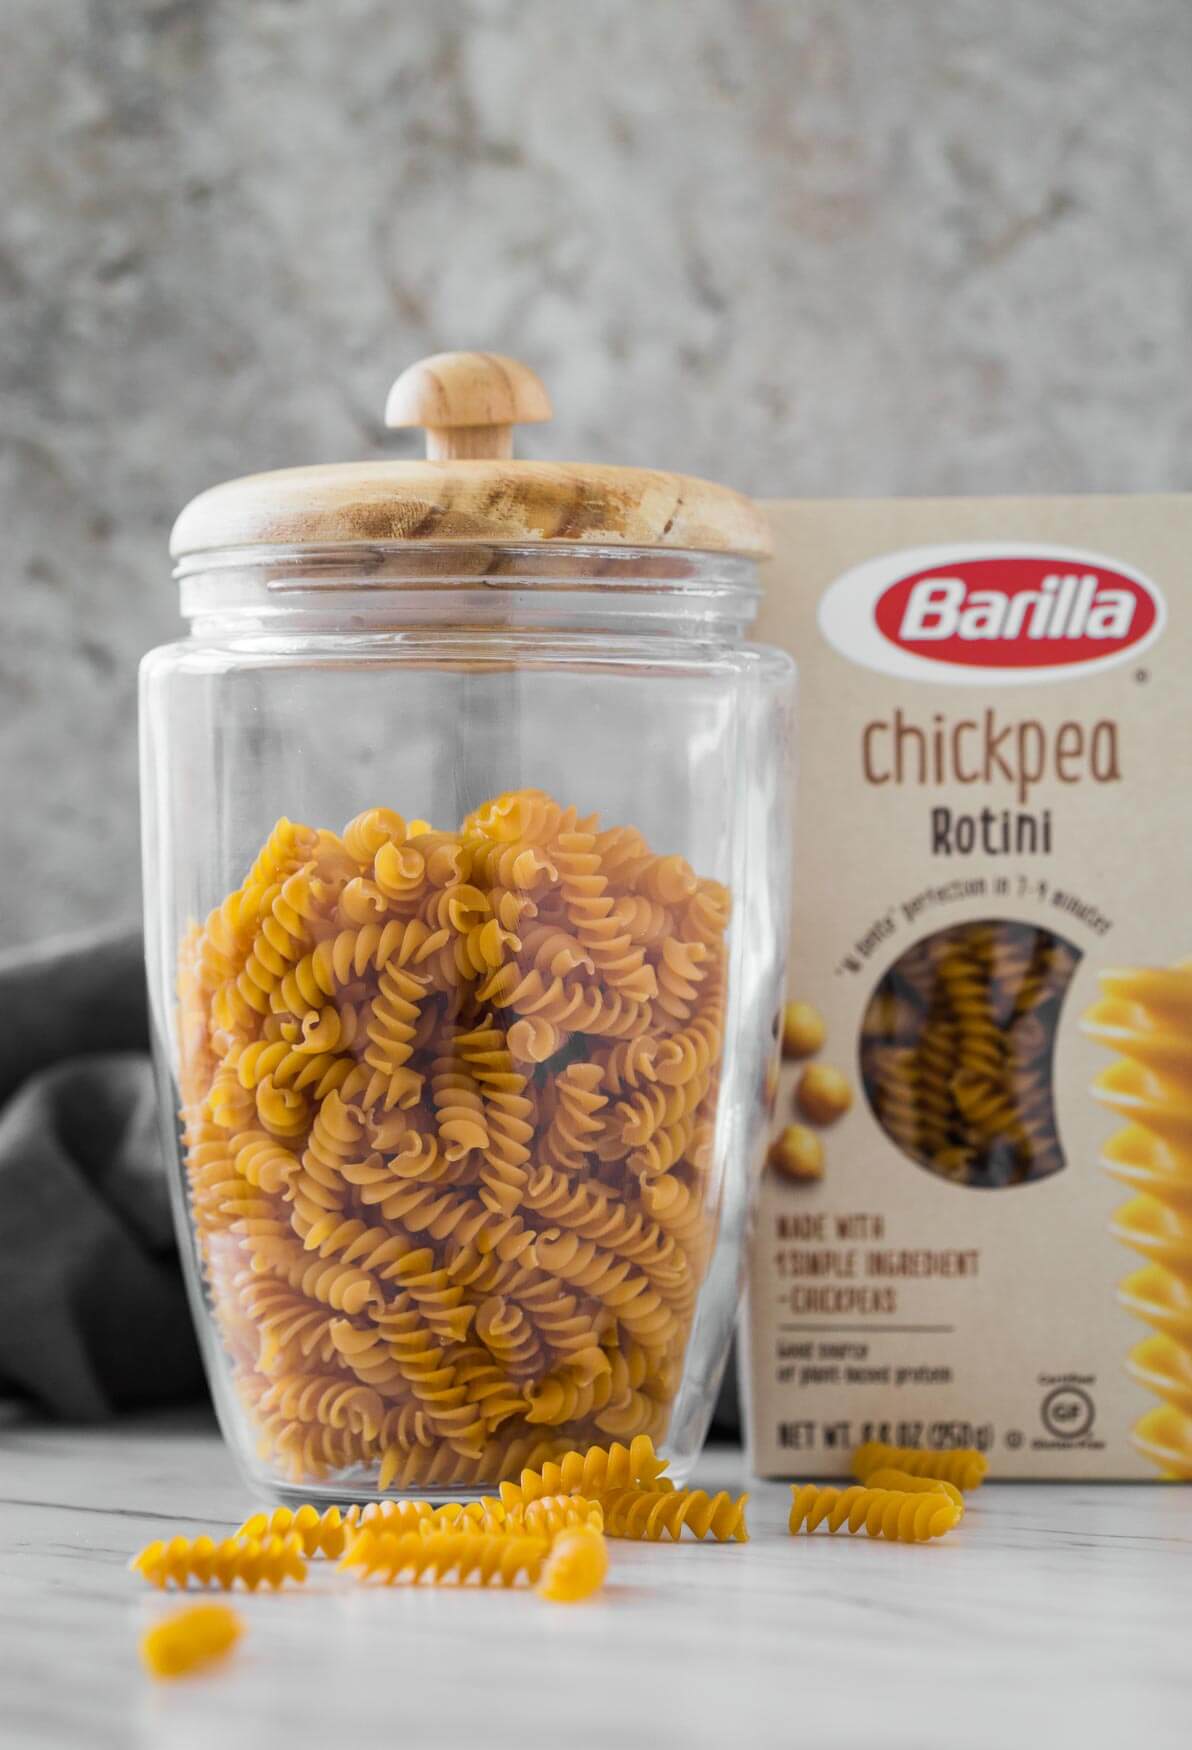 chickpea rotini pasta in a glass jar and in its package